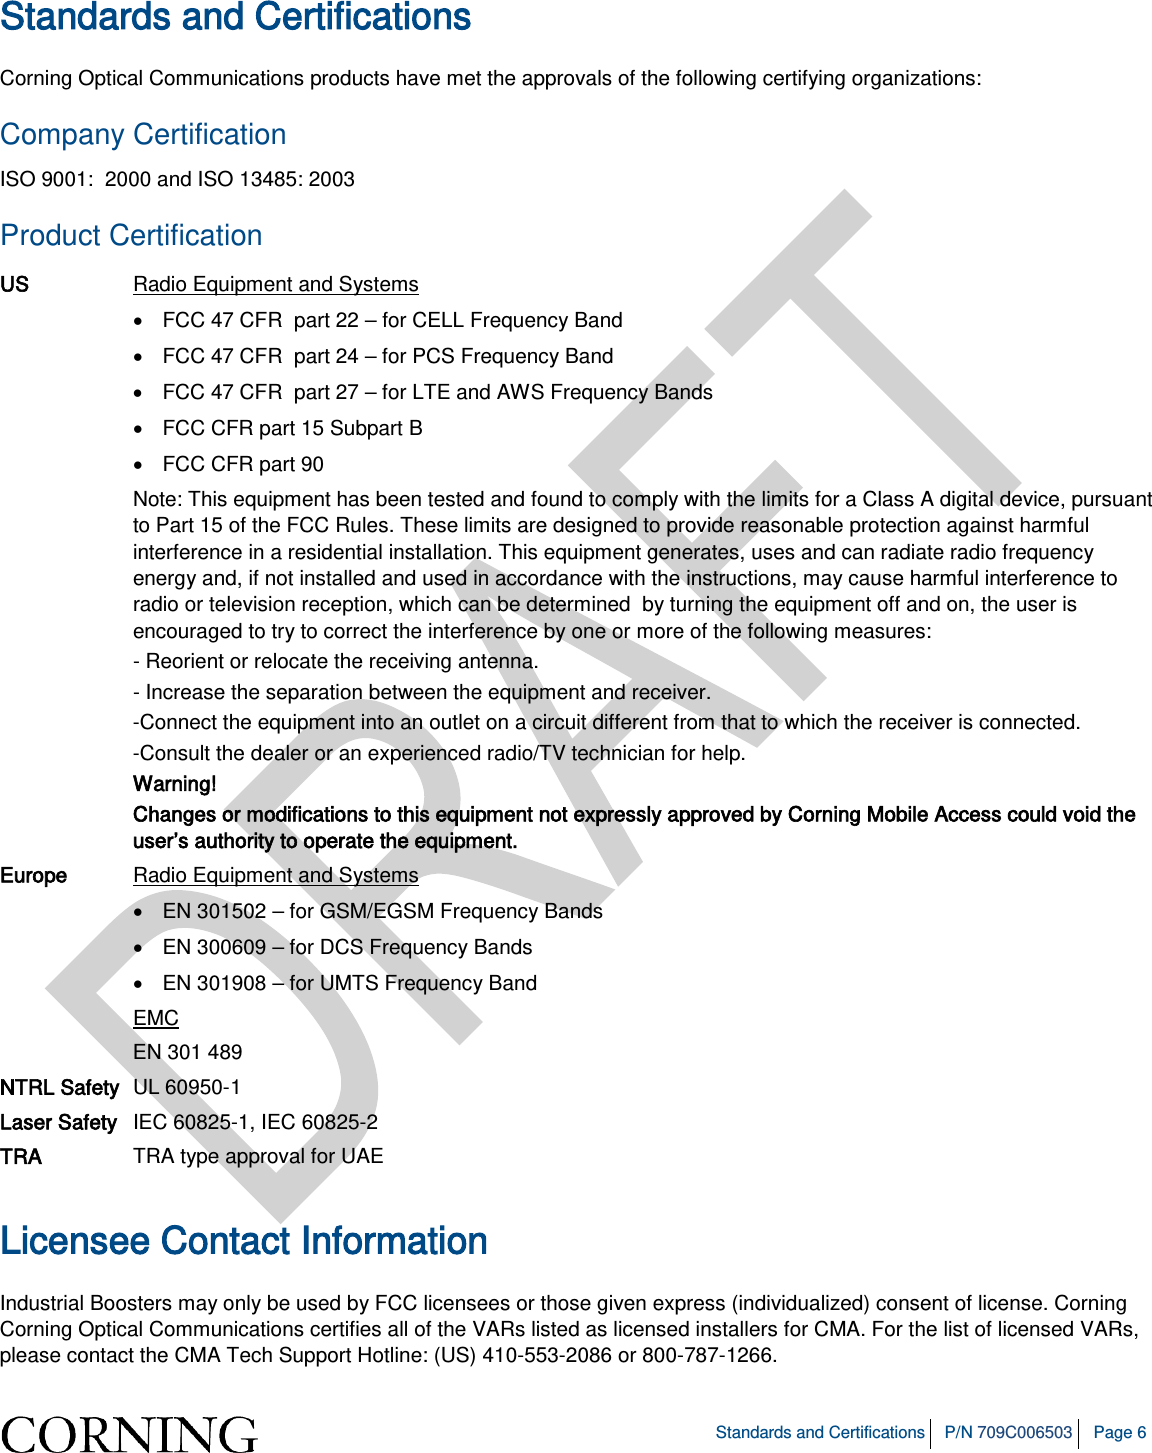   Standards and Certifications P/N 709C006503 Page 6  Standards and Certifications Corning Optical Communications products have met the approvals of the following certifying organizations: Company Certification ISO 9001:  2000 and ISO 13485: 2003 Product Certification US Radio Equipment and Systems • FCC 47 CFR  part 22 – for CELL Frequency Band • FCC 47 CFR  part 24 – for PCS Frequency Band • FCC 47 CFR  part 27 – for LTE and AWS Frequency Bands • FCC CFR part 15 Subpart B  • FCC CFR part 90  Note: This equipment has been tested and found to comply with the limits for a Class A digital device, pursuant to Part 15 of the FCC Rules. These limits are designed to provide reasonable protection against harmful interference in a residential installation. This equipment generates, uses and can radiate radio frequency energy and, if not installed and used in accordance with the instructions, may cause harmful interference to radio or television reception, which can be determined  by turning the equipment off and on, the user is encouraged to try to correct the interference by one or more of the following measures: - Reorient or relocate the receiving antenna. - Increase the separation between the equipment and receiver. -Connect the equipment into an outlet on a circuit different from that to which the receiver is connected. -Consult the dealer or an experienced radio/TV technician for help. Warning! Changes or modifications to this equipment not expressly approved by Corning Mobile Access could void the user’s authority to operate the equipment. Europe Radio Equipment and Systems • EN 301502 – for GSM/EGSM Frequency Bands • EN 300609 – for DCS Frequency Bands • EN 301908 – for UMTS Frequency Band EMC EN 301 489 NTRL Safety UL 60950-1 Laser Safety IEC 60825-1, IEC 60825-2 TRA TRA type approval for UAE  Licensee Contact Information Industrial Boosters may only be used by FCC licensees or those given express (individualized) consent of license. Corning Corning Optical Communications certifies all of the VARs listed as licensed installers for CMA. For the list of licensed VARs, please contact the CMA Tech Support Hotline: (US) 410-553-2086 or 800-787-1266. 